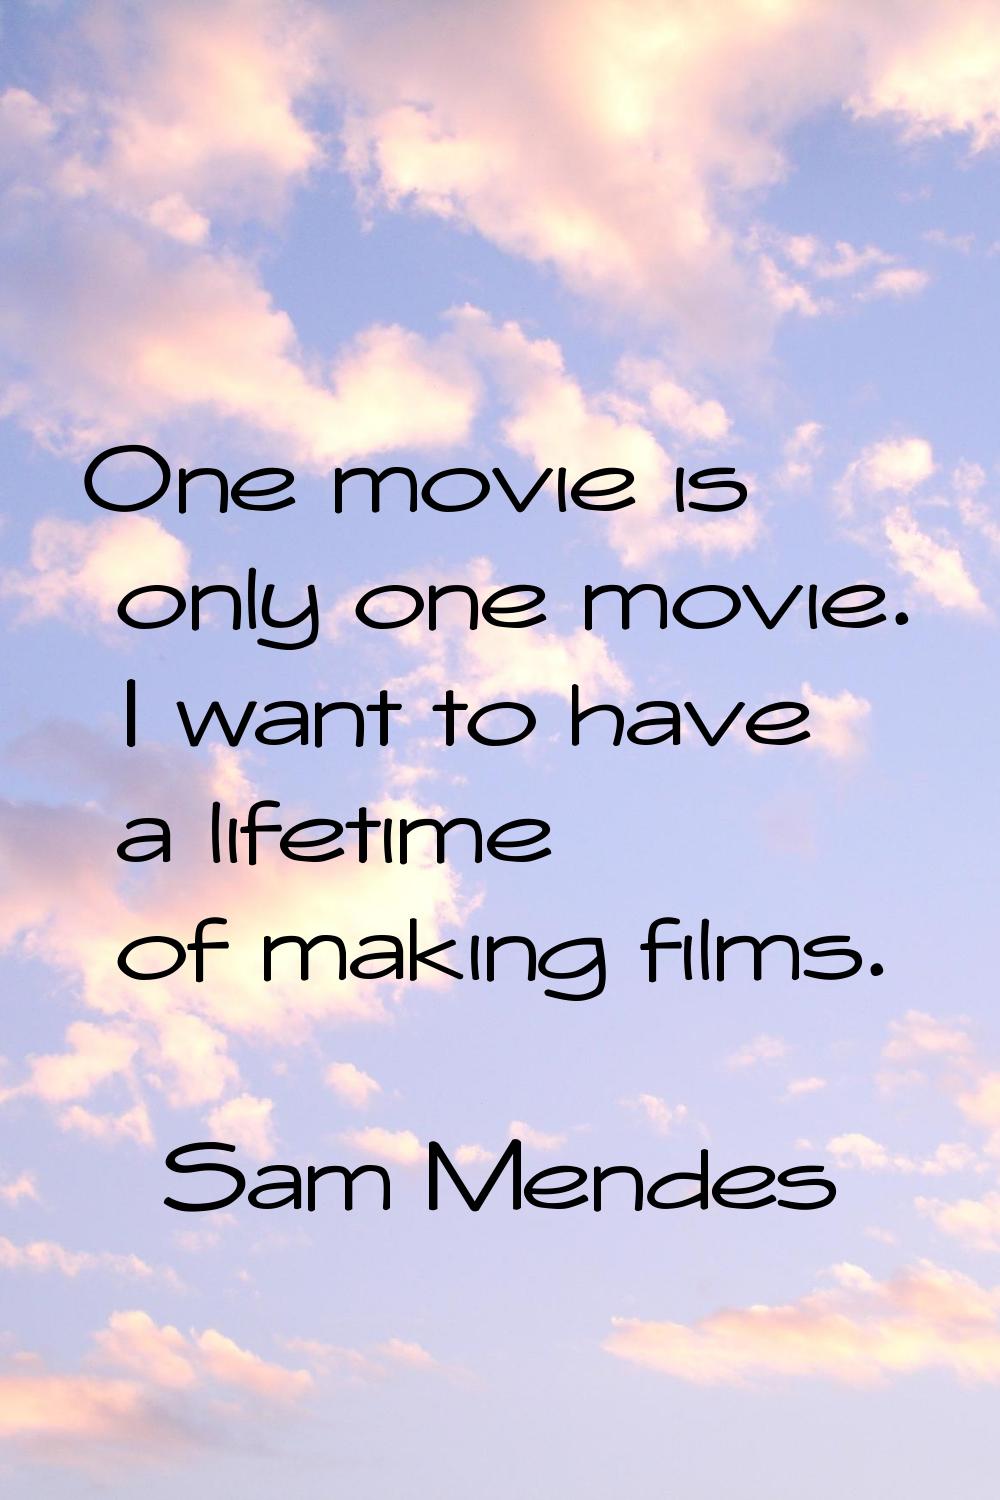 One movie is only one movie. I want to have a lifetime of making films.